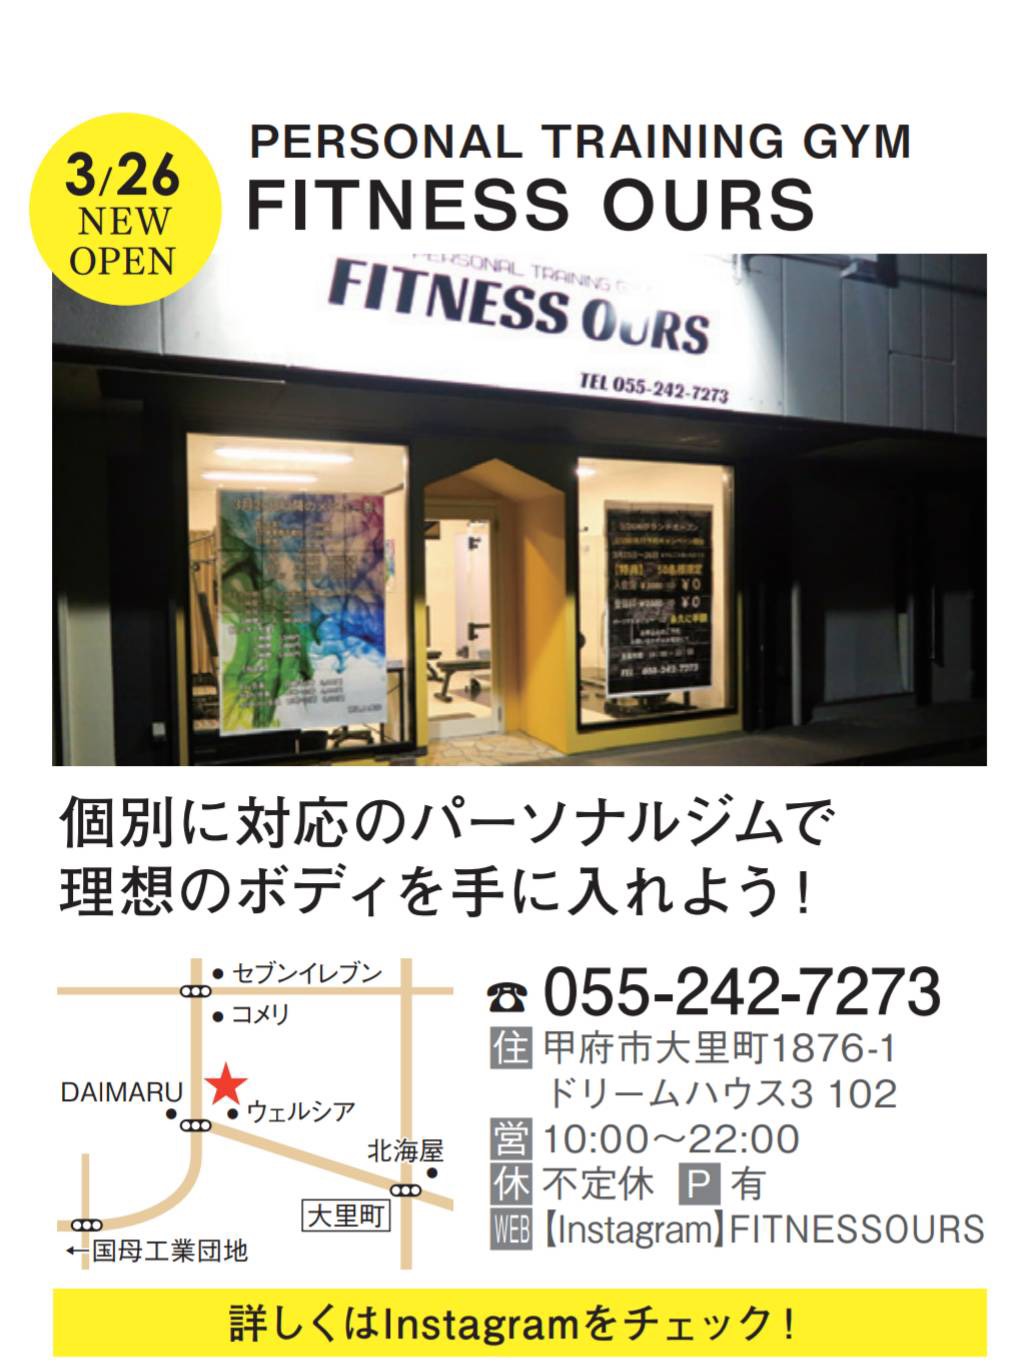 FITNESS OURSお知らせ